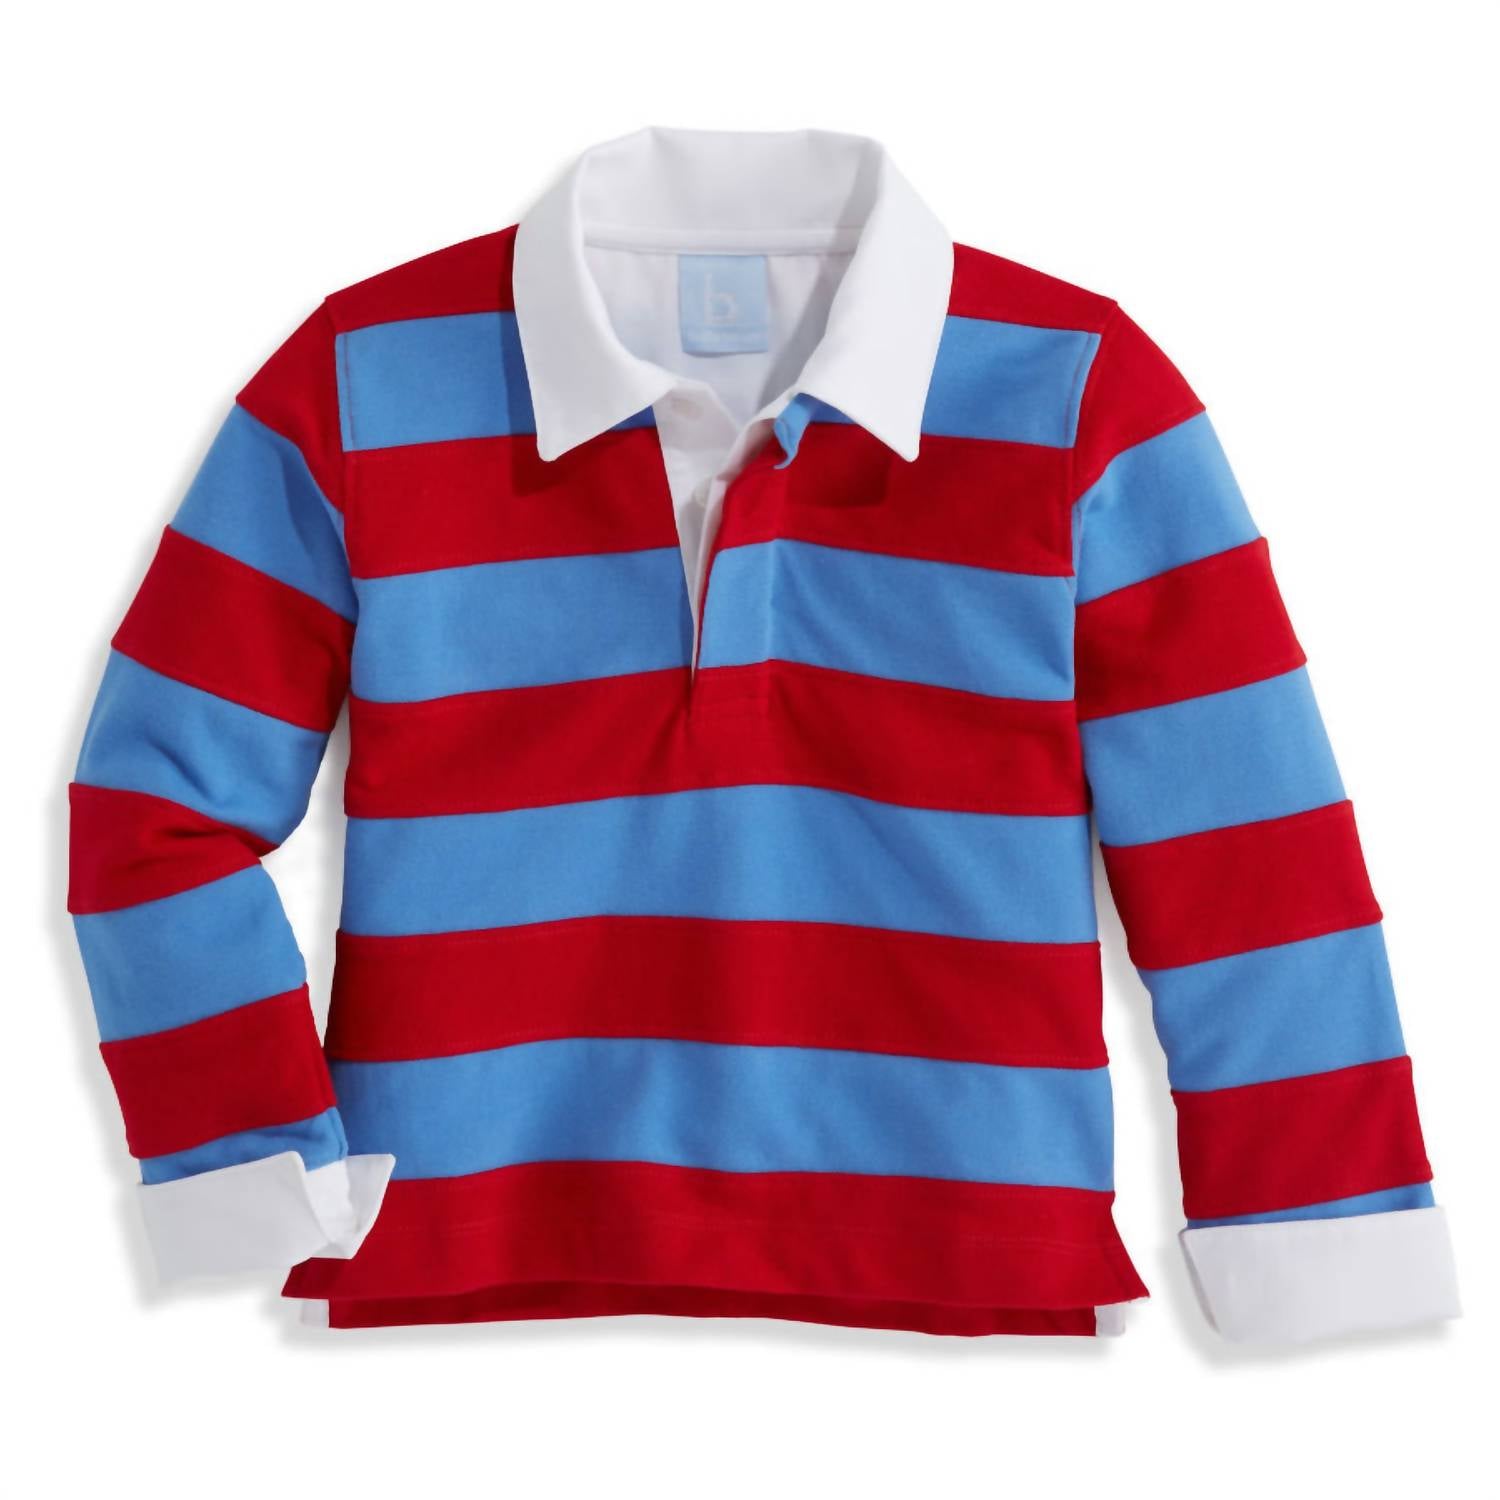 BELLA BLISS Kids' Fitz Rugby Shirt in Red/Blue